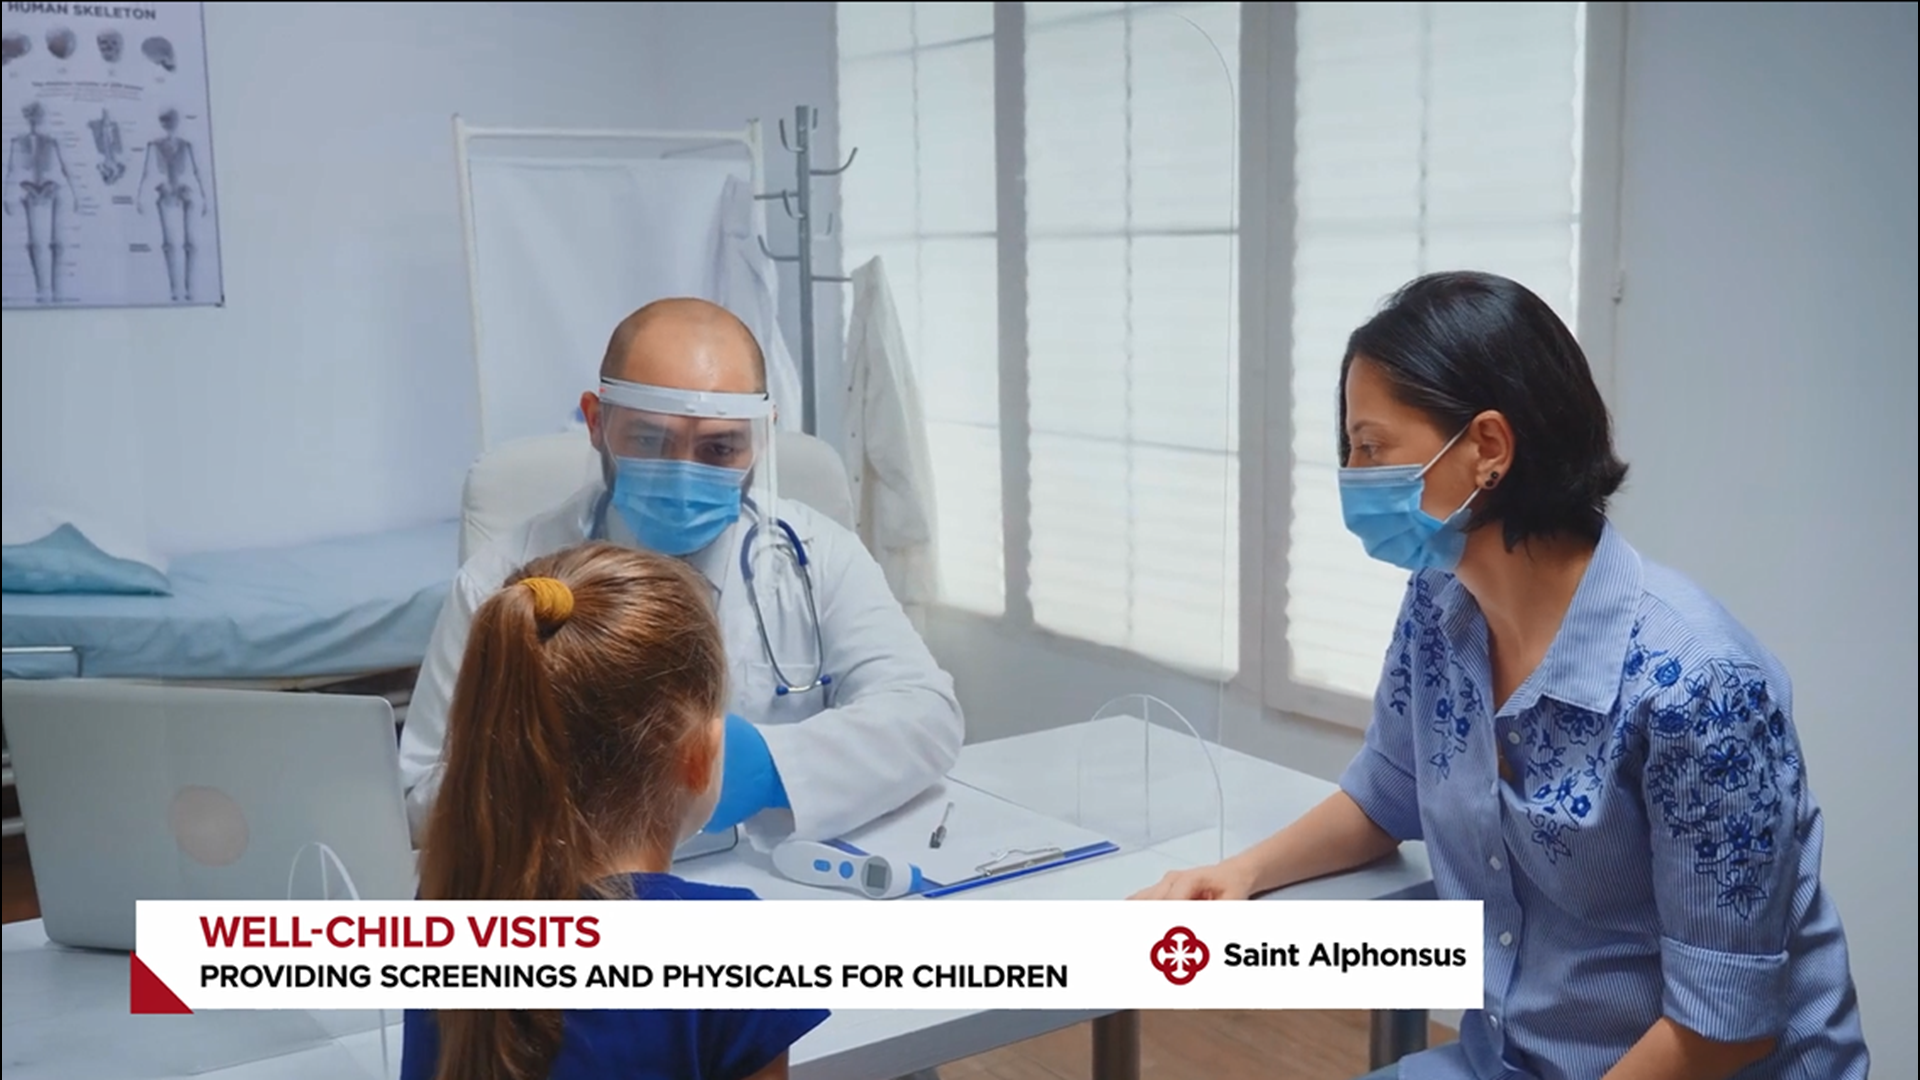 Dr. Jared Thompson with Saint Alphonsus covers why it's important to maintain well-child visits even during the pandemic.